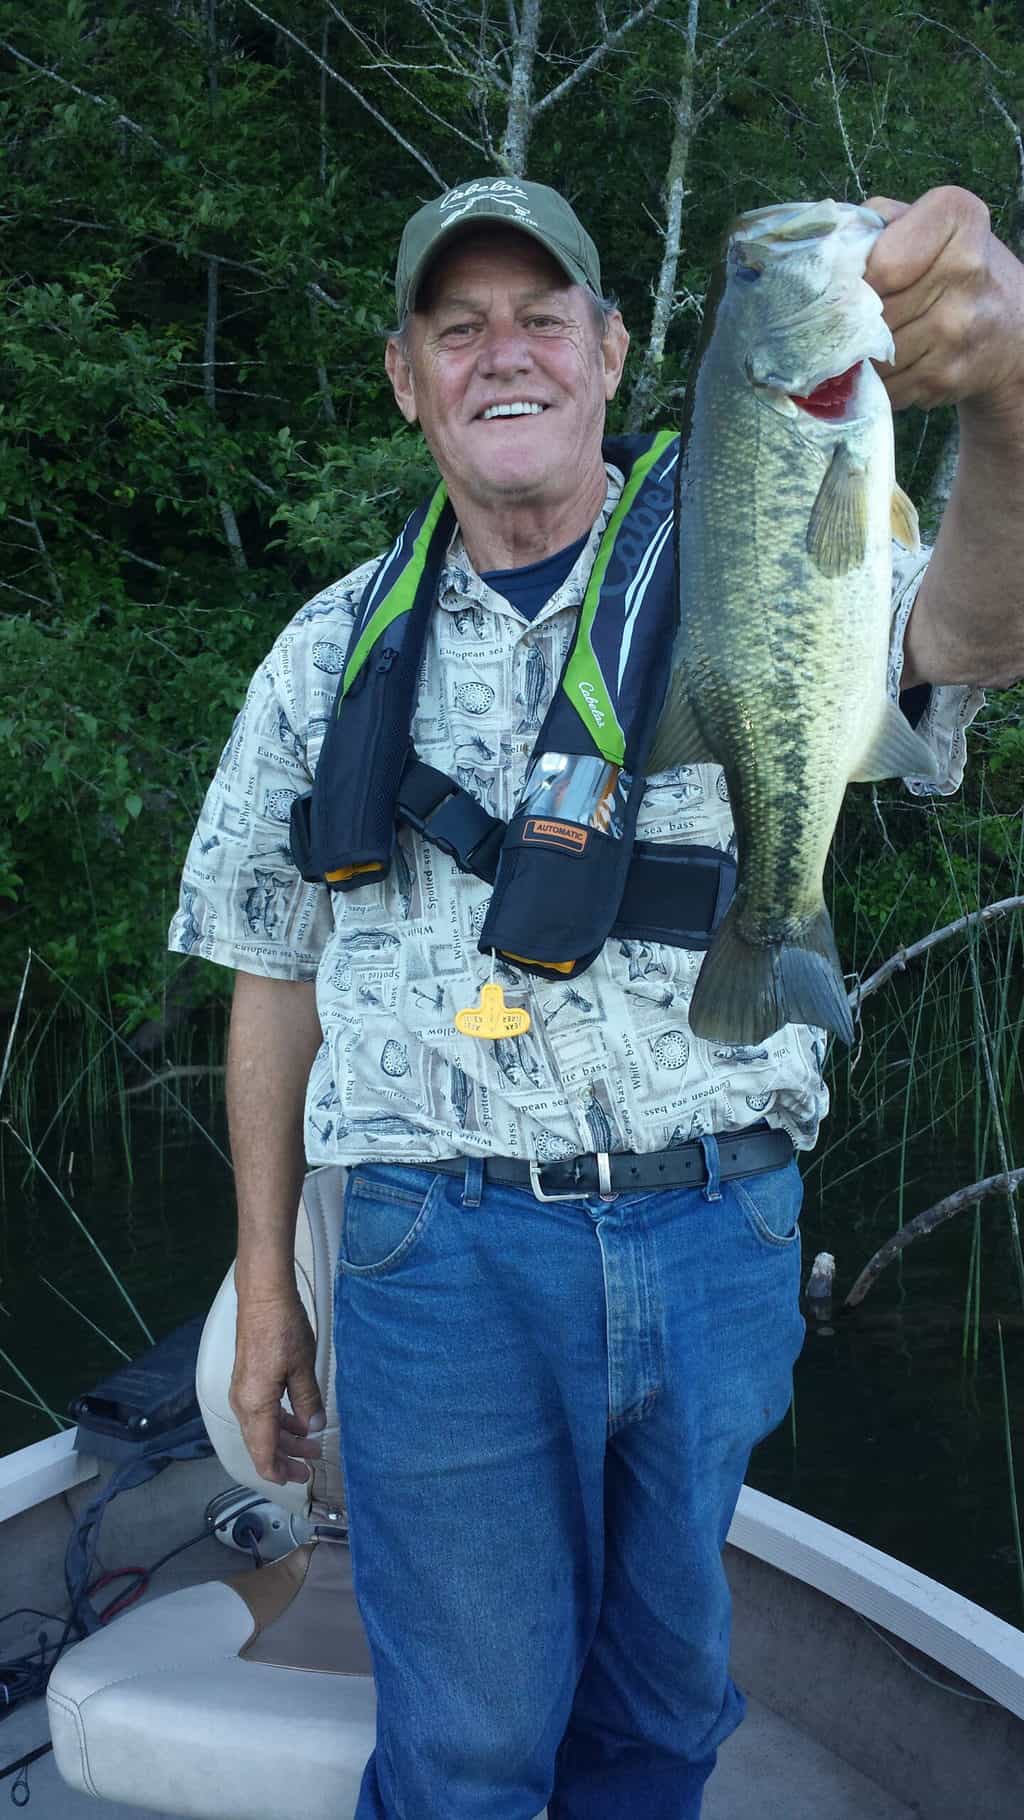 Siltcoos Lake largemouth bass being held by an angler.